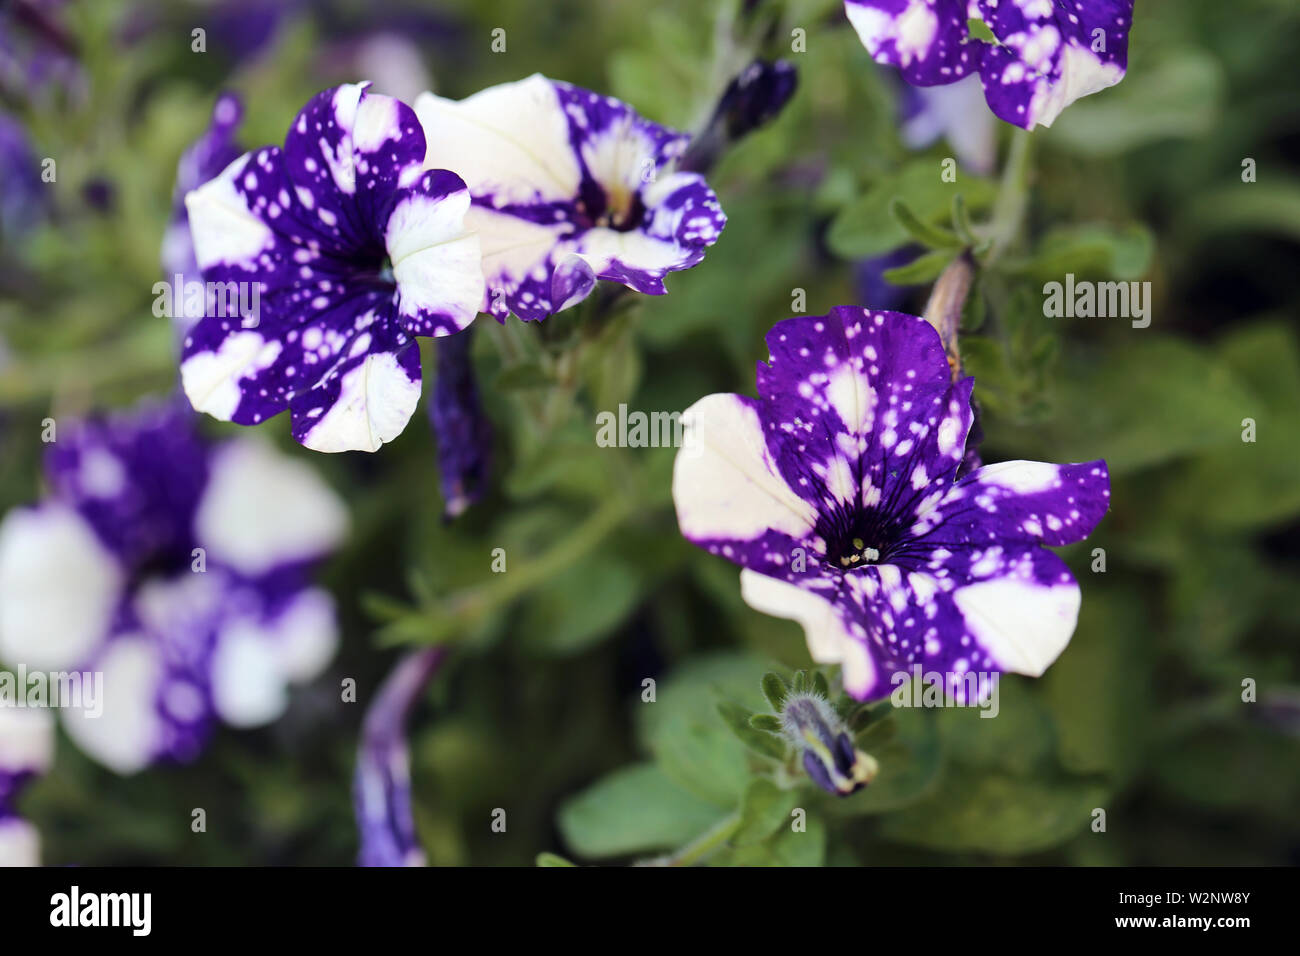 Exotic pansy flowers photographed in Madeira. These pansies have bicolored flowers with white and purple dots and area. Beautiful spotted pansies! Stock Photo